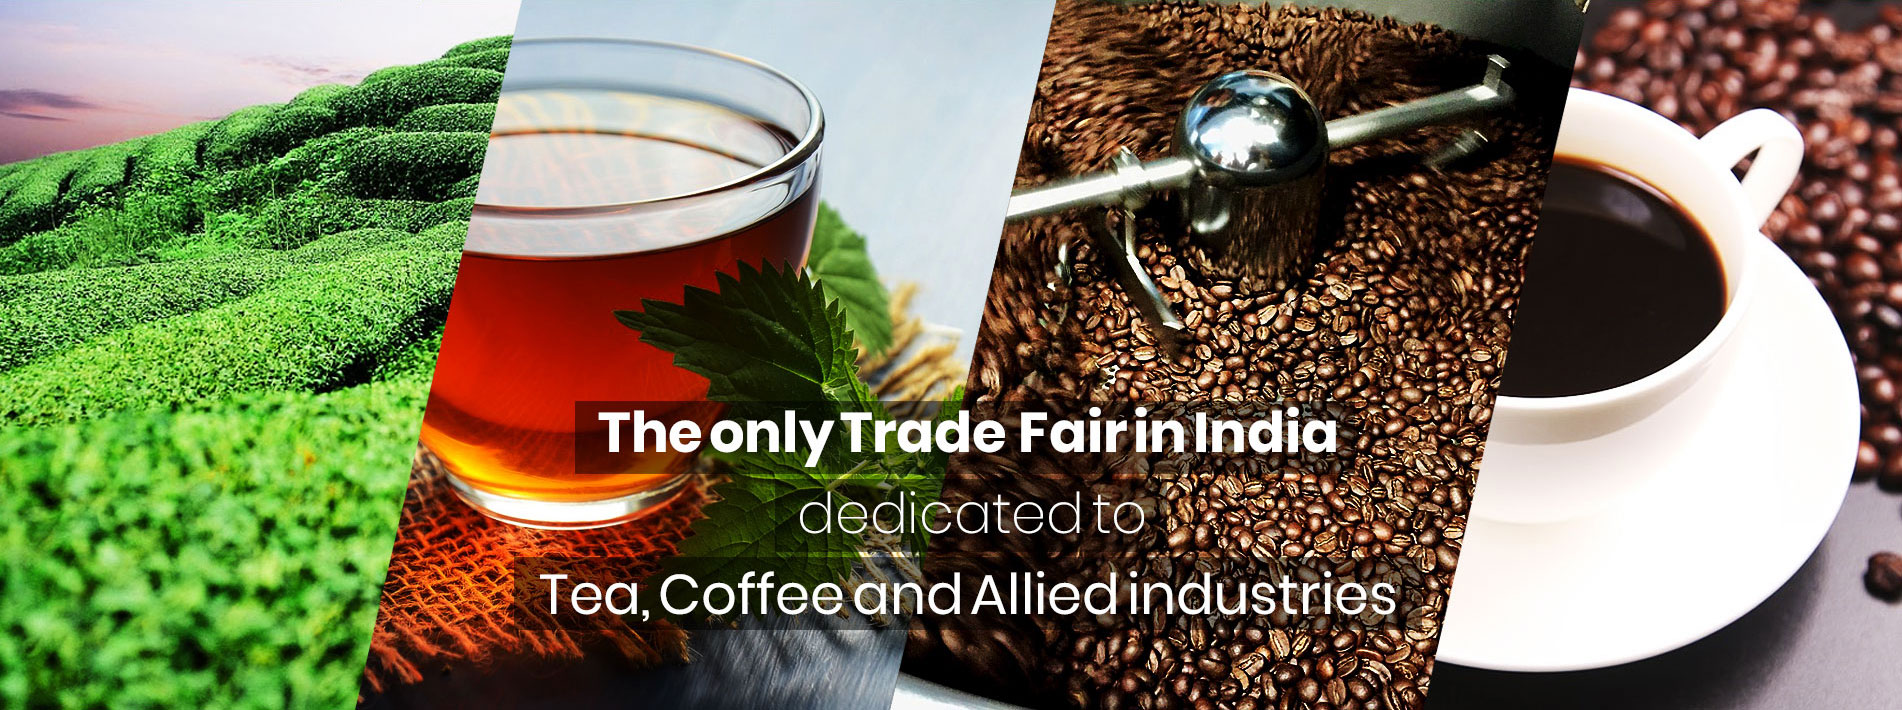 World Tea Coffee Expo The only trade fair in India dedicated to Tea